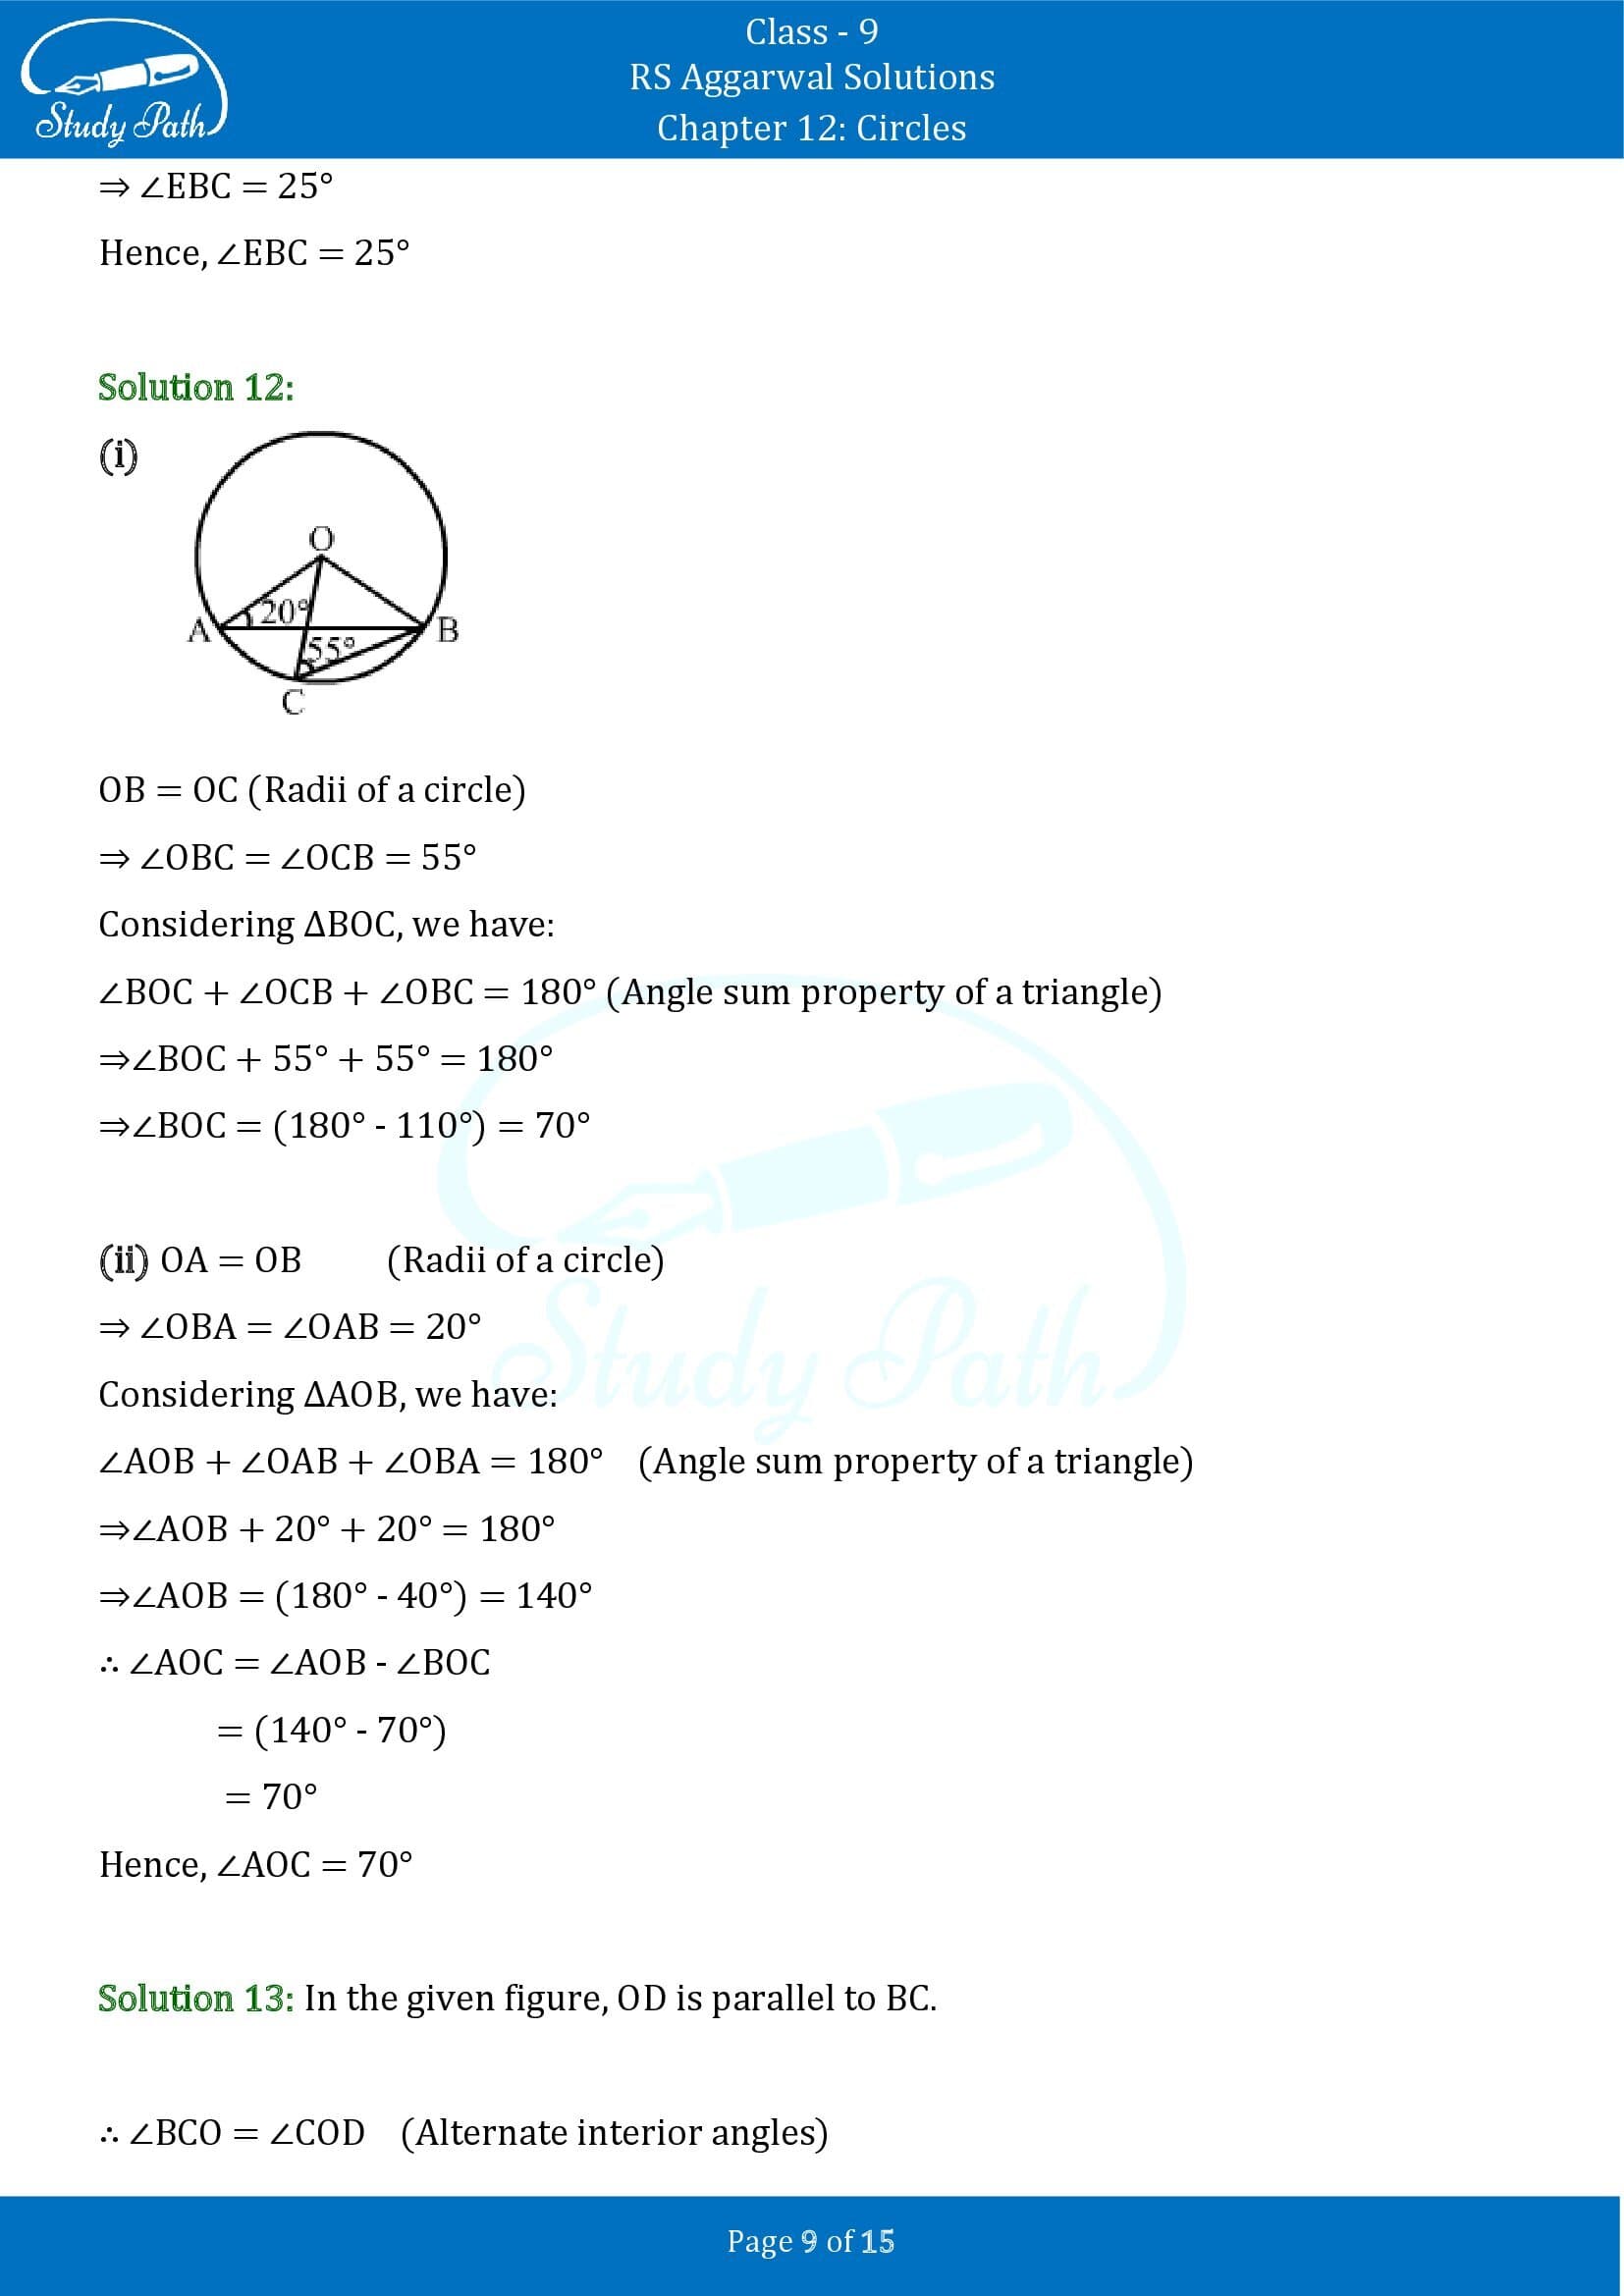 RS Aggarwal Solutions Class 9 Chapter 12 Circles Exercise 12B 00009